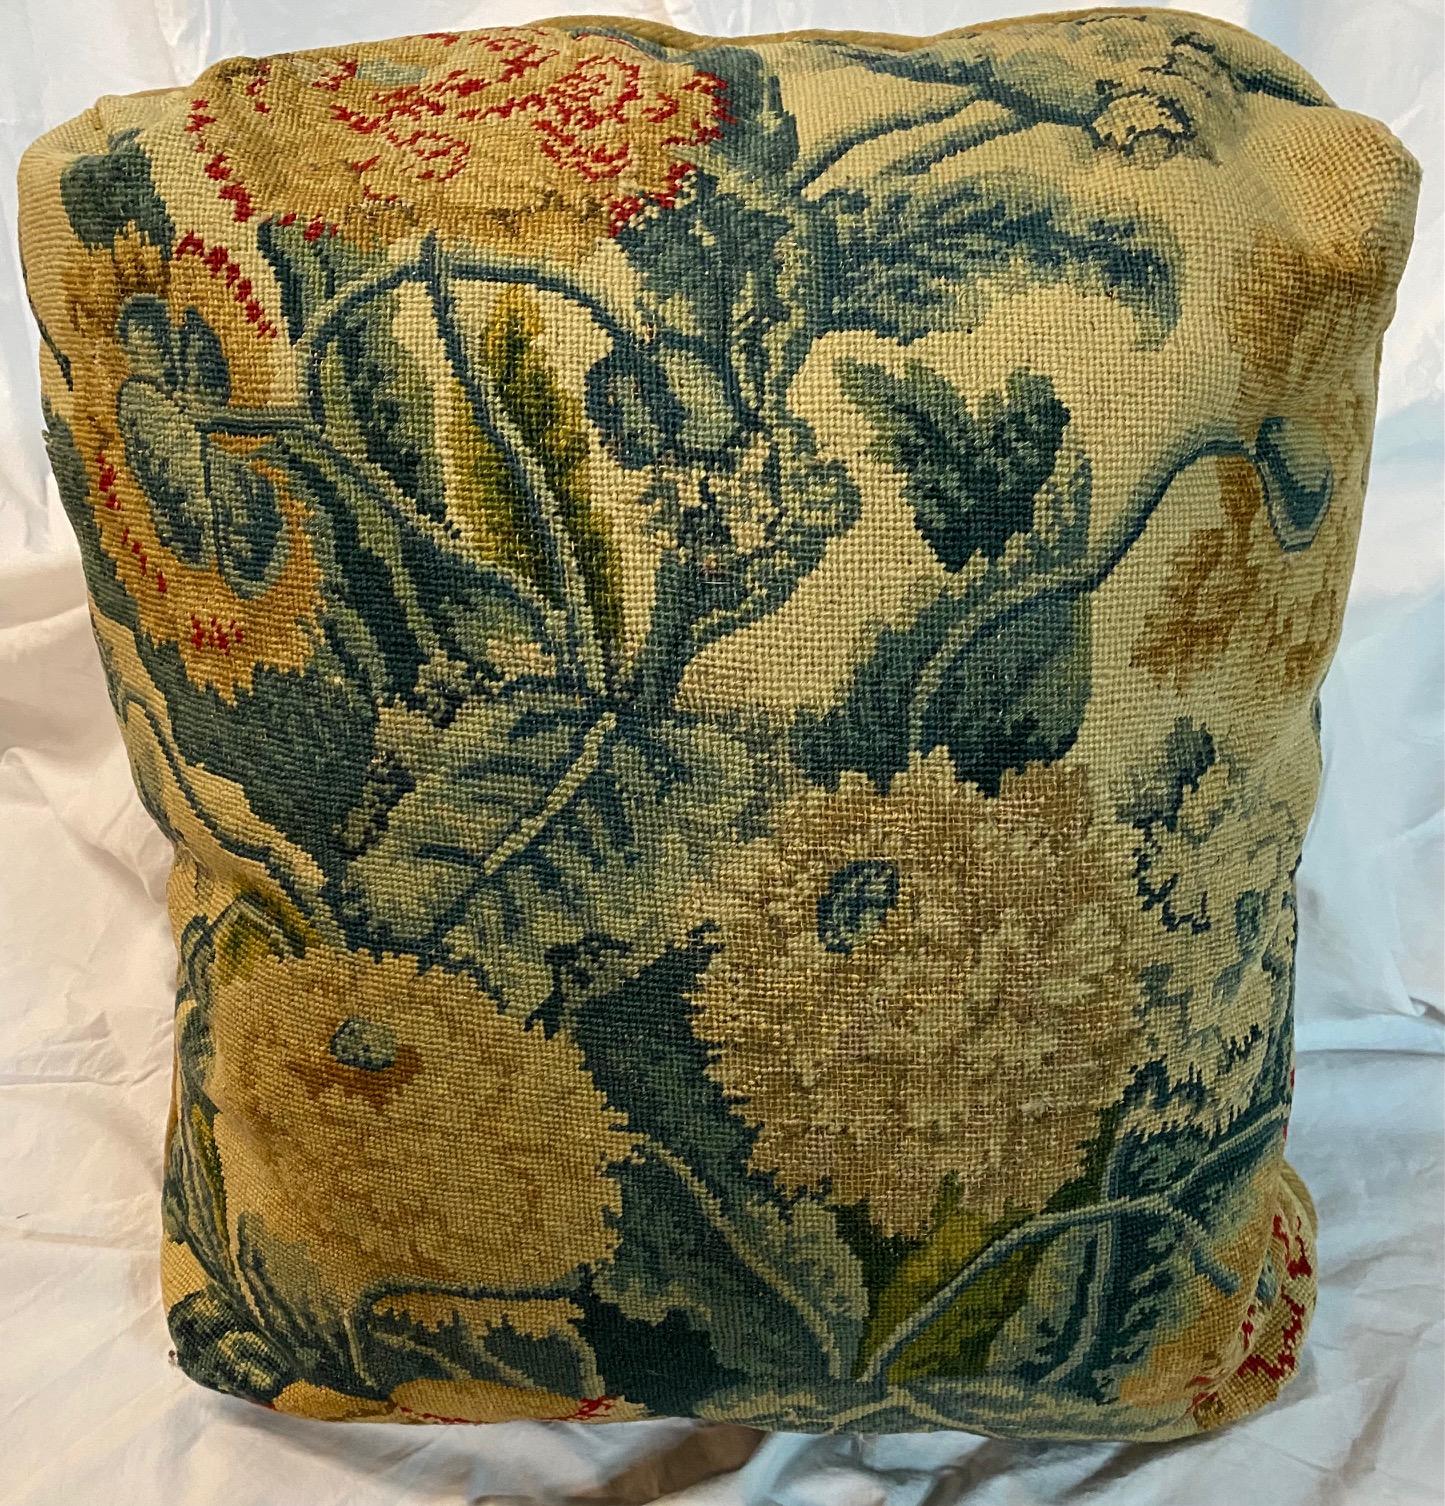 Pair of needlework floral cushions with velvet backing.
18th century
Measures: 18